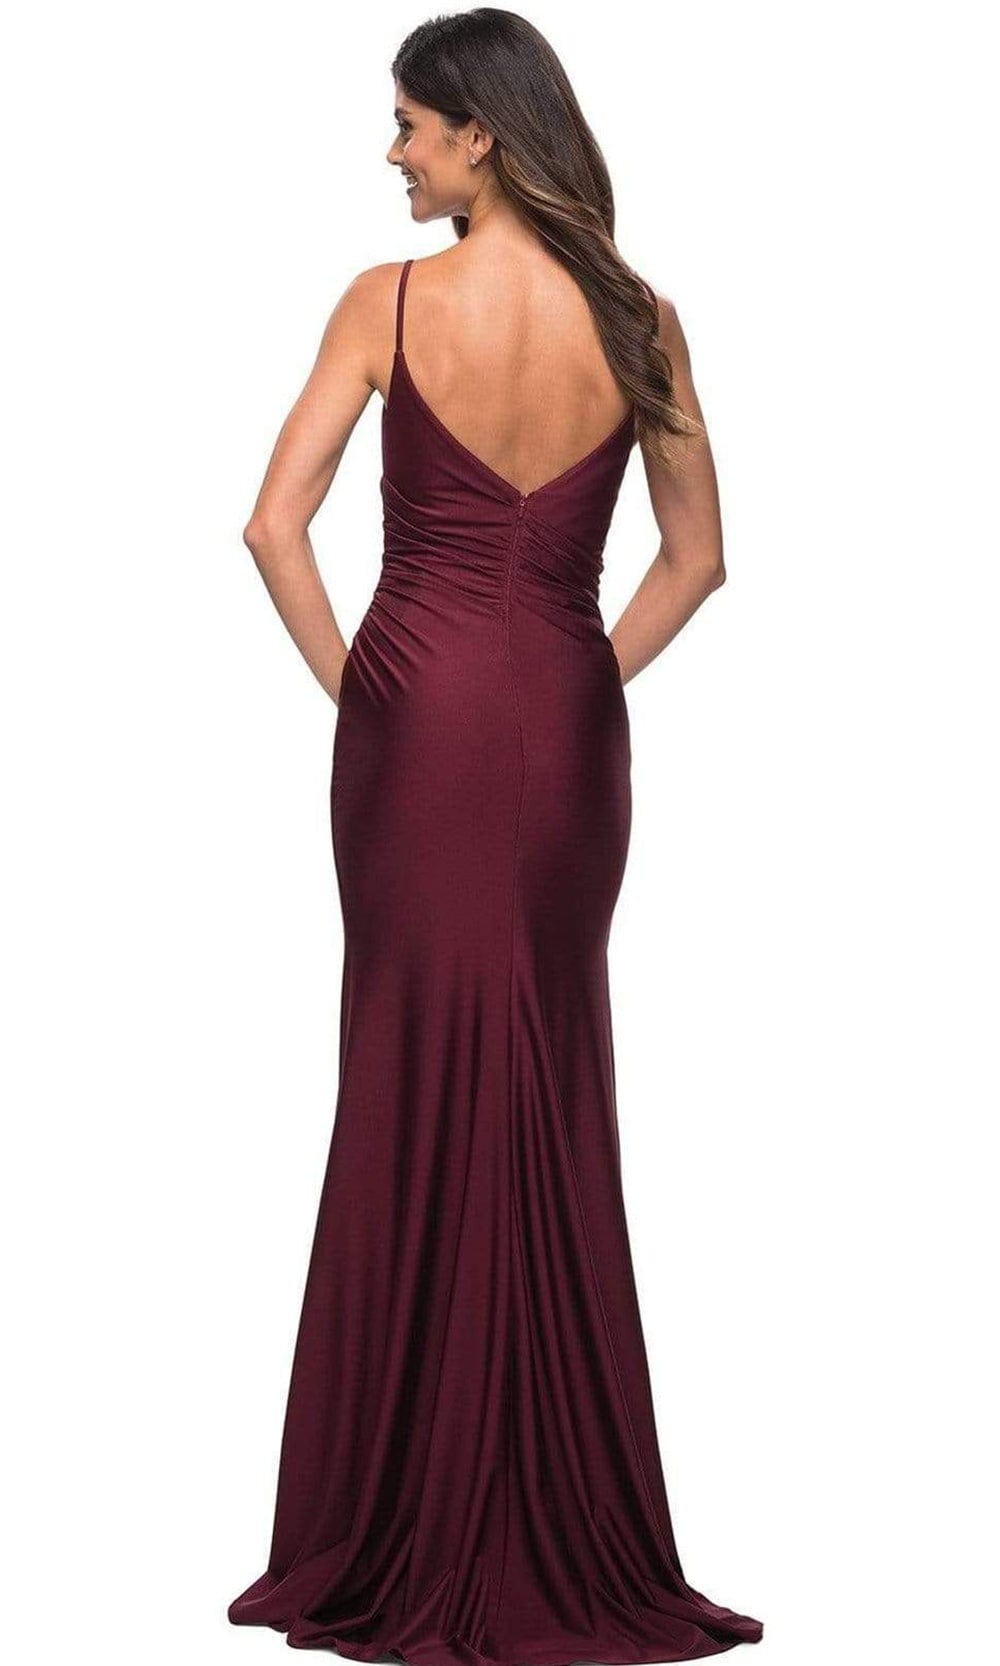 La Femme - 30095 Ruched Sleeveless Long Gown Prom Dresses